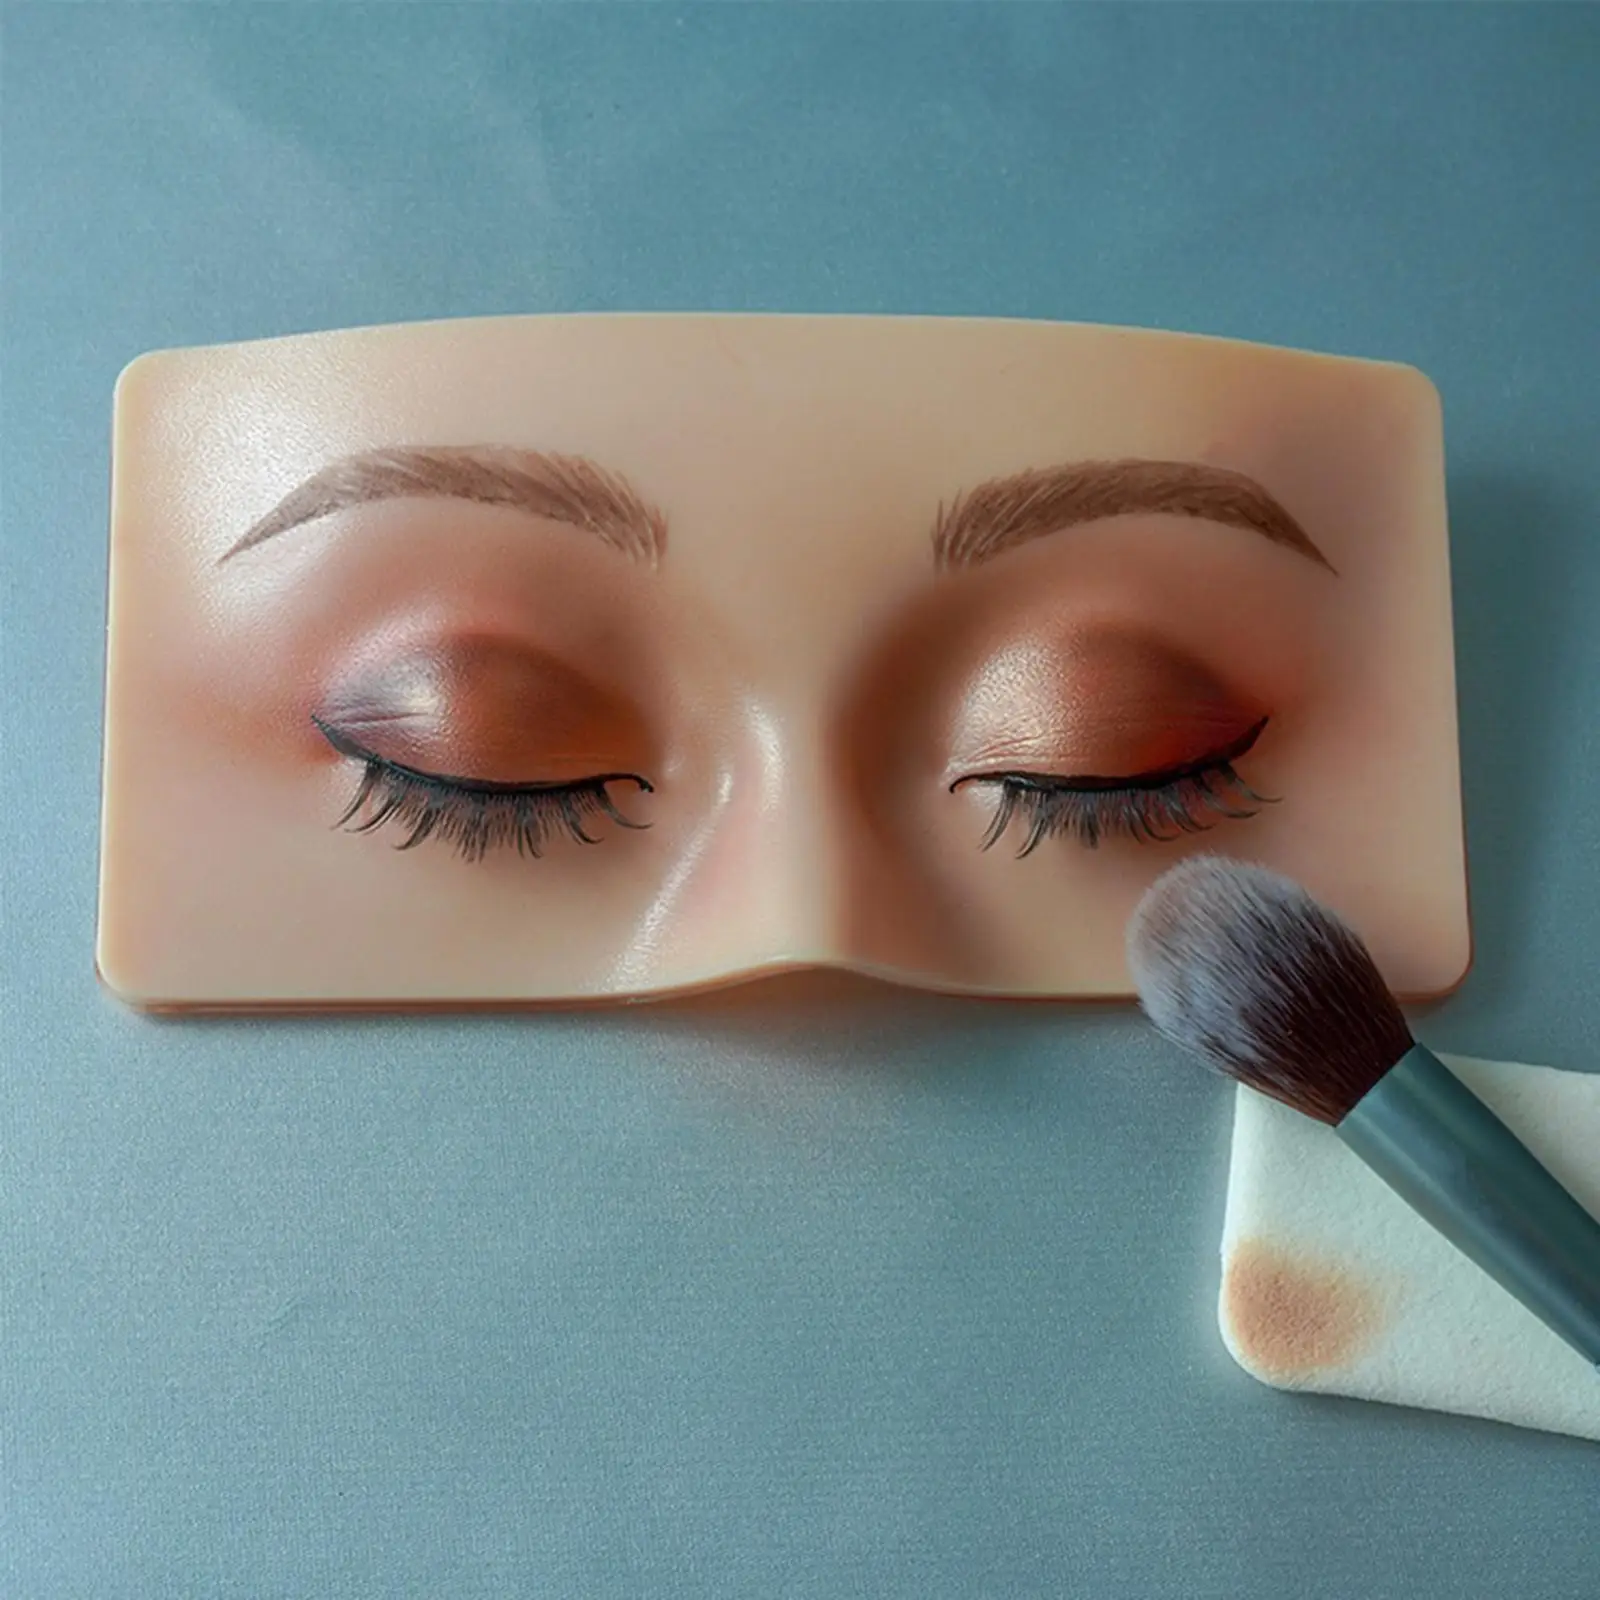 Makeup Practice board, Training make up Practice Board for Professional Enthusiasts Beginners Training